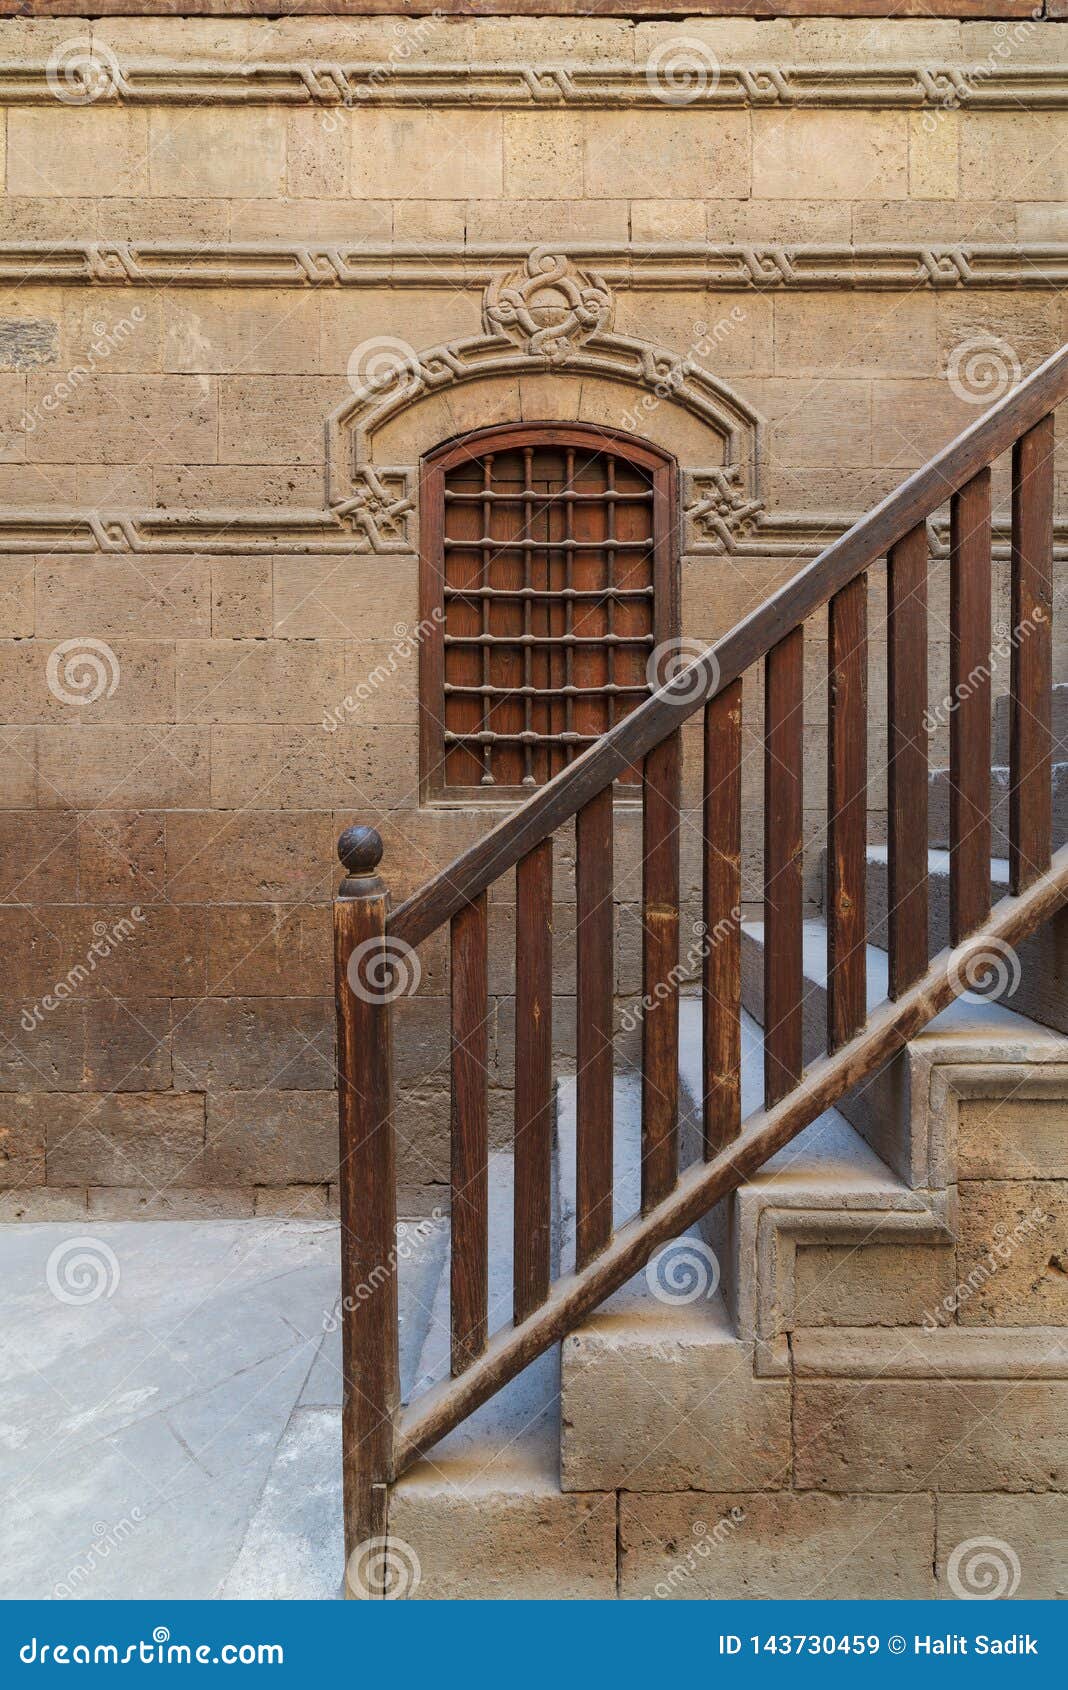 wooden window and staircase with wooden balustrade leading to historic building, old cairo, egypt